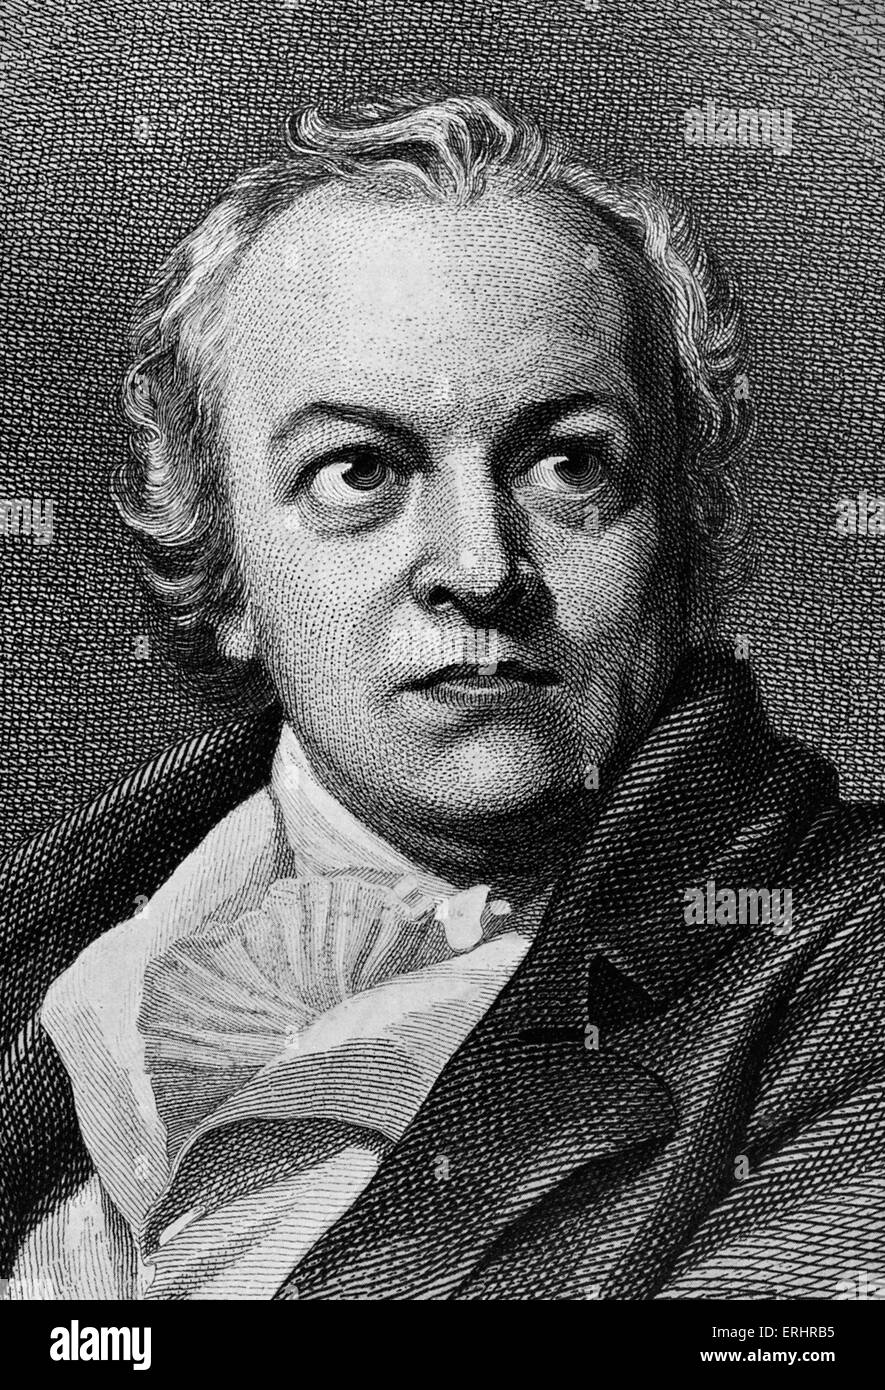 William Blake - after the portrait by Phillips.  Poet, painter and engraver: 28 November 1757 - 12 August 1827. Stock Photo